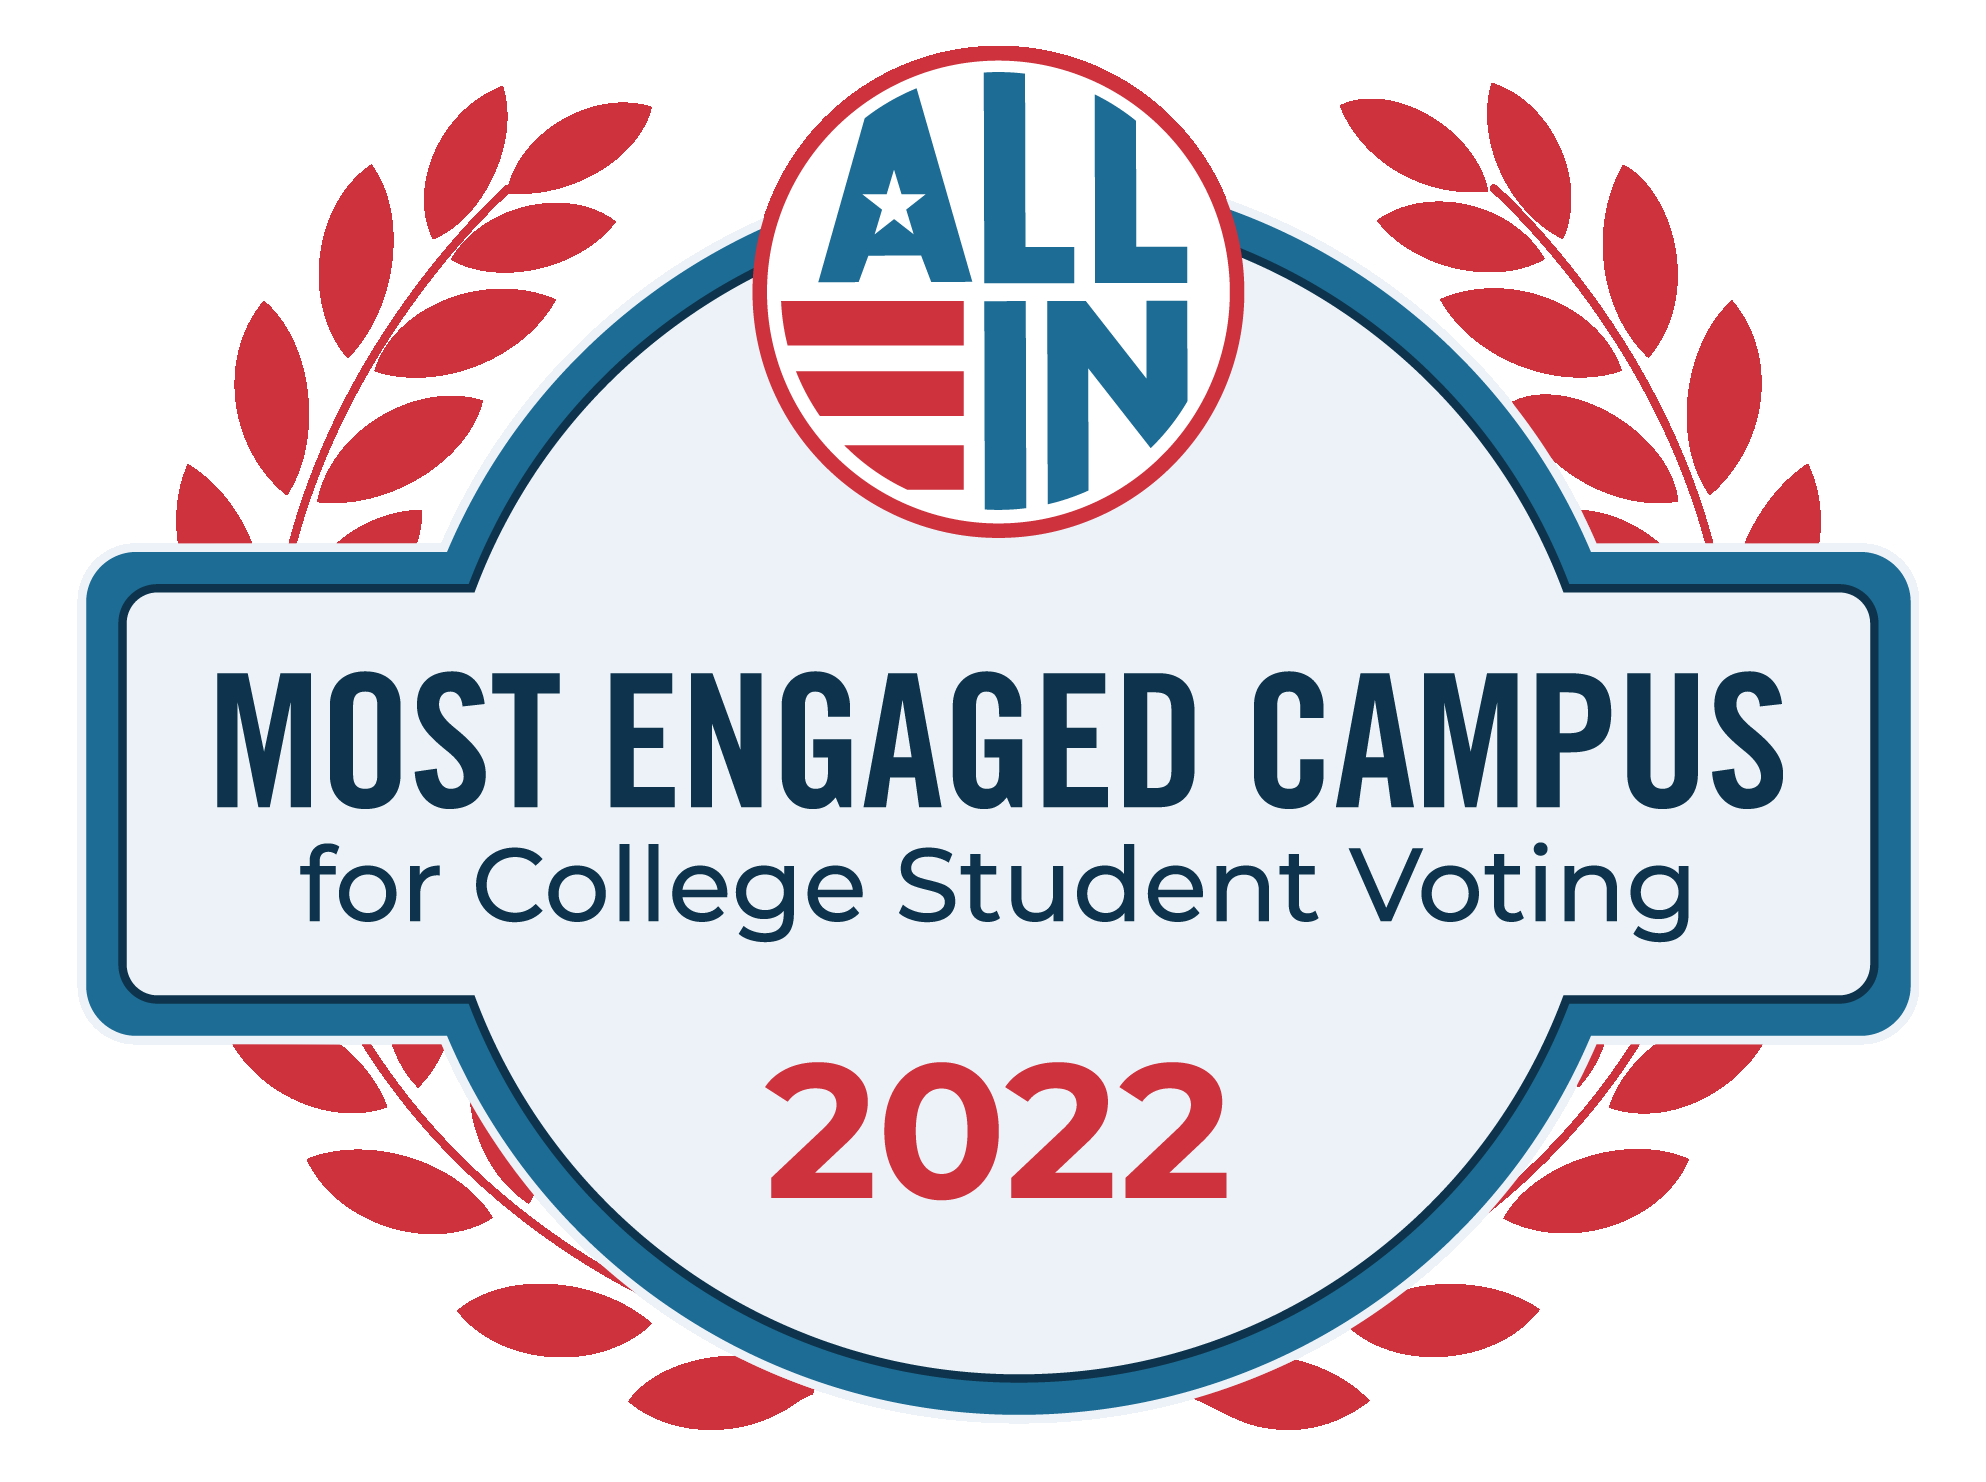 Most Engaged Campus Award received in 2022 for Student Voting